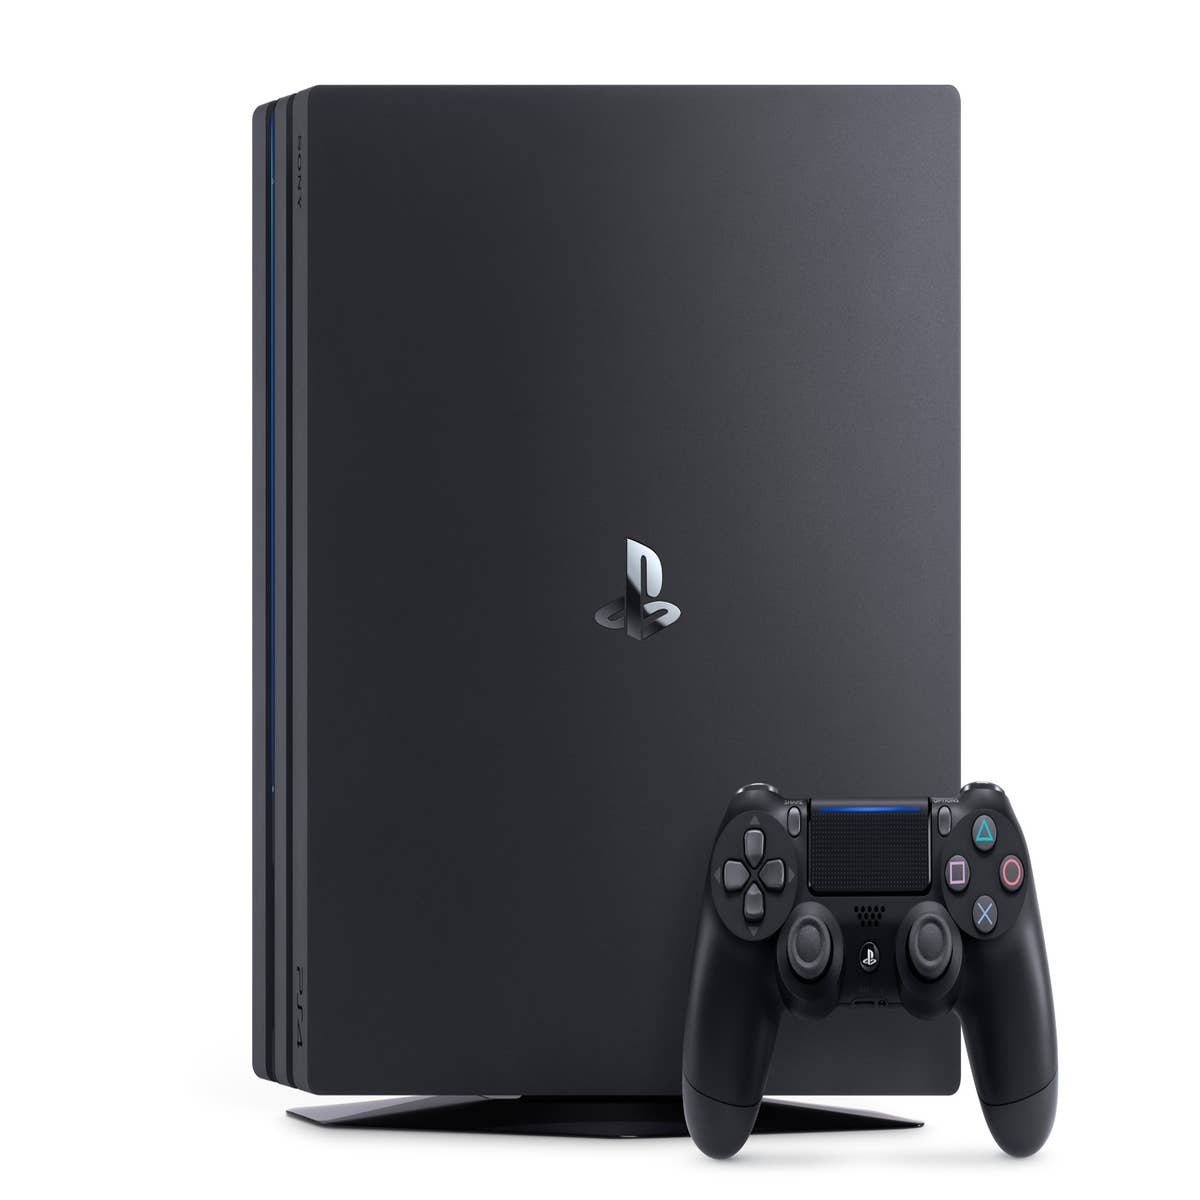 Sony unveils slimmed-down PlayStation 5 for holiday season